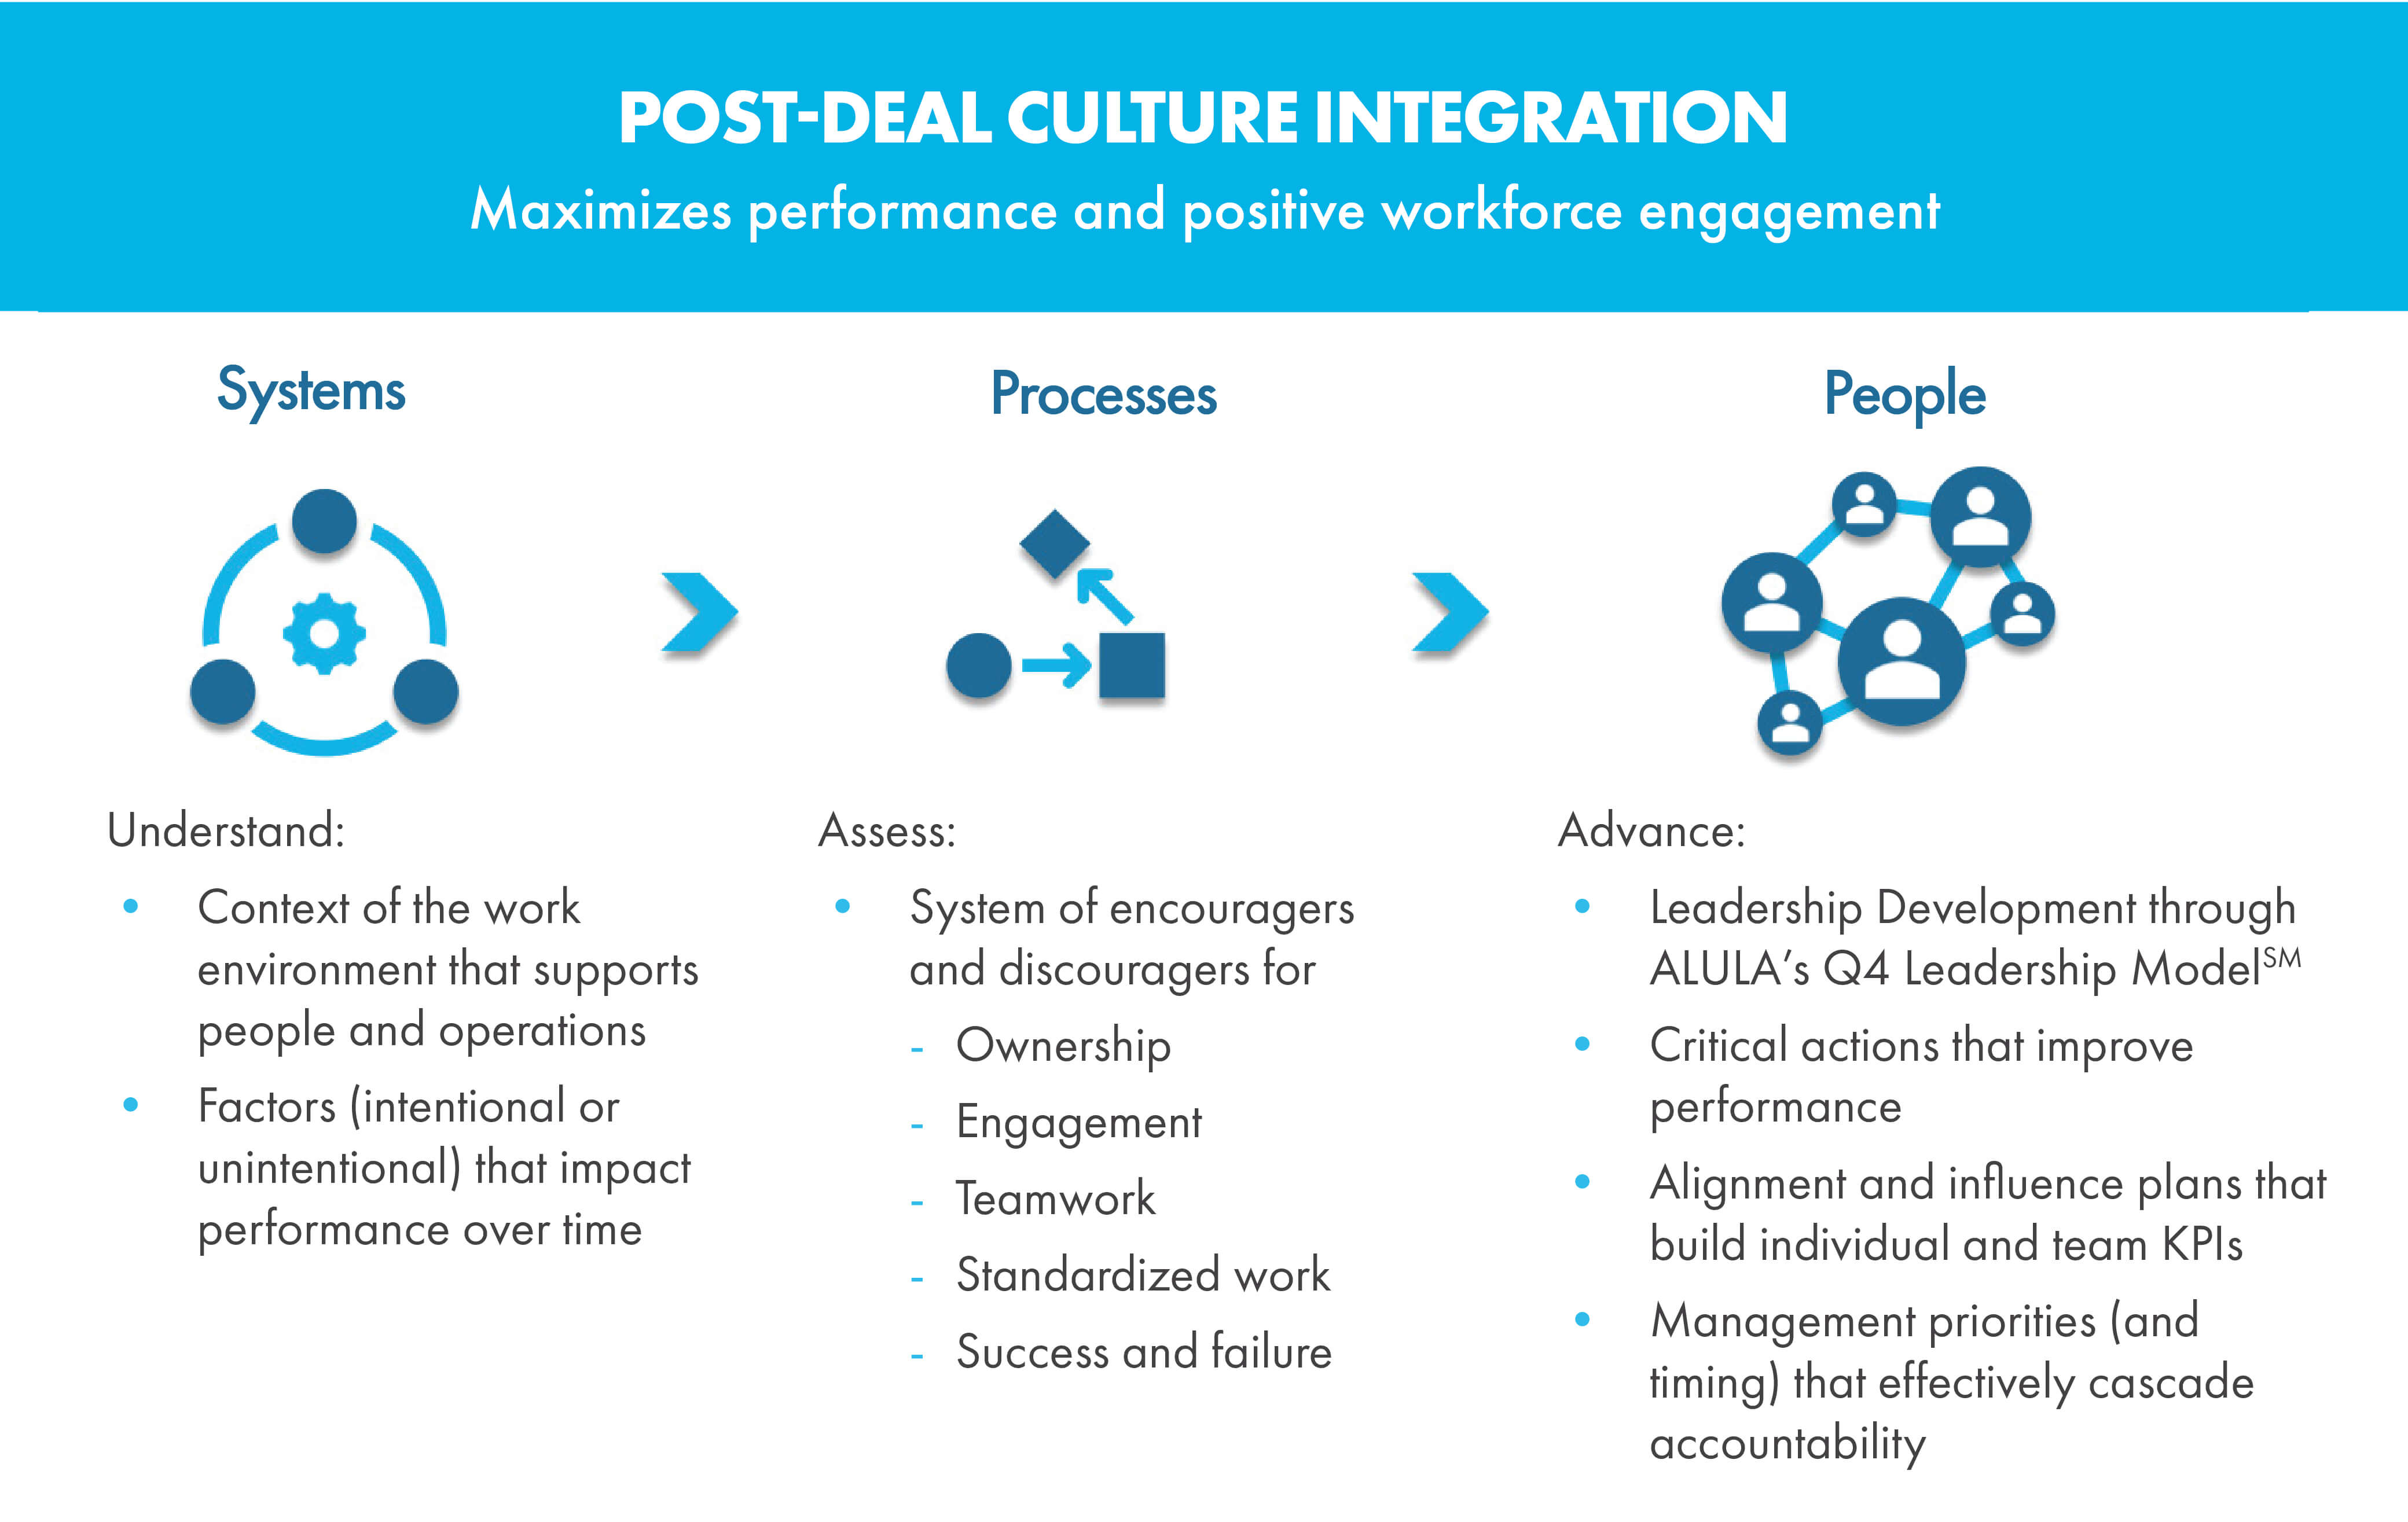 Post-Deal Culture Integration for maximizing performance and positive workforce engagement